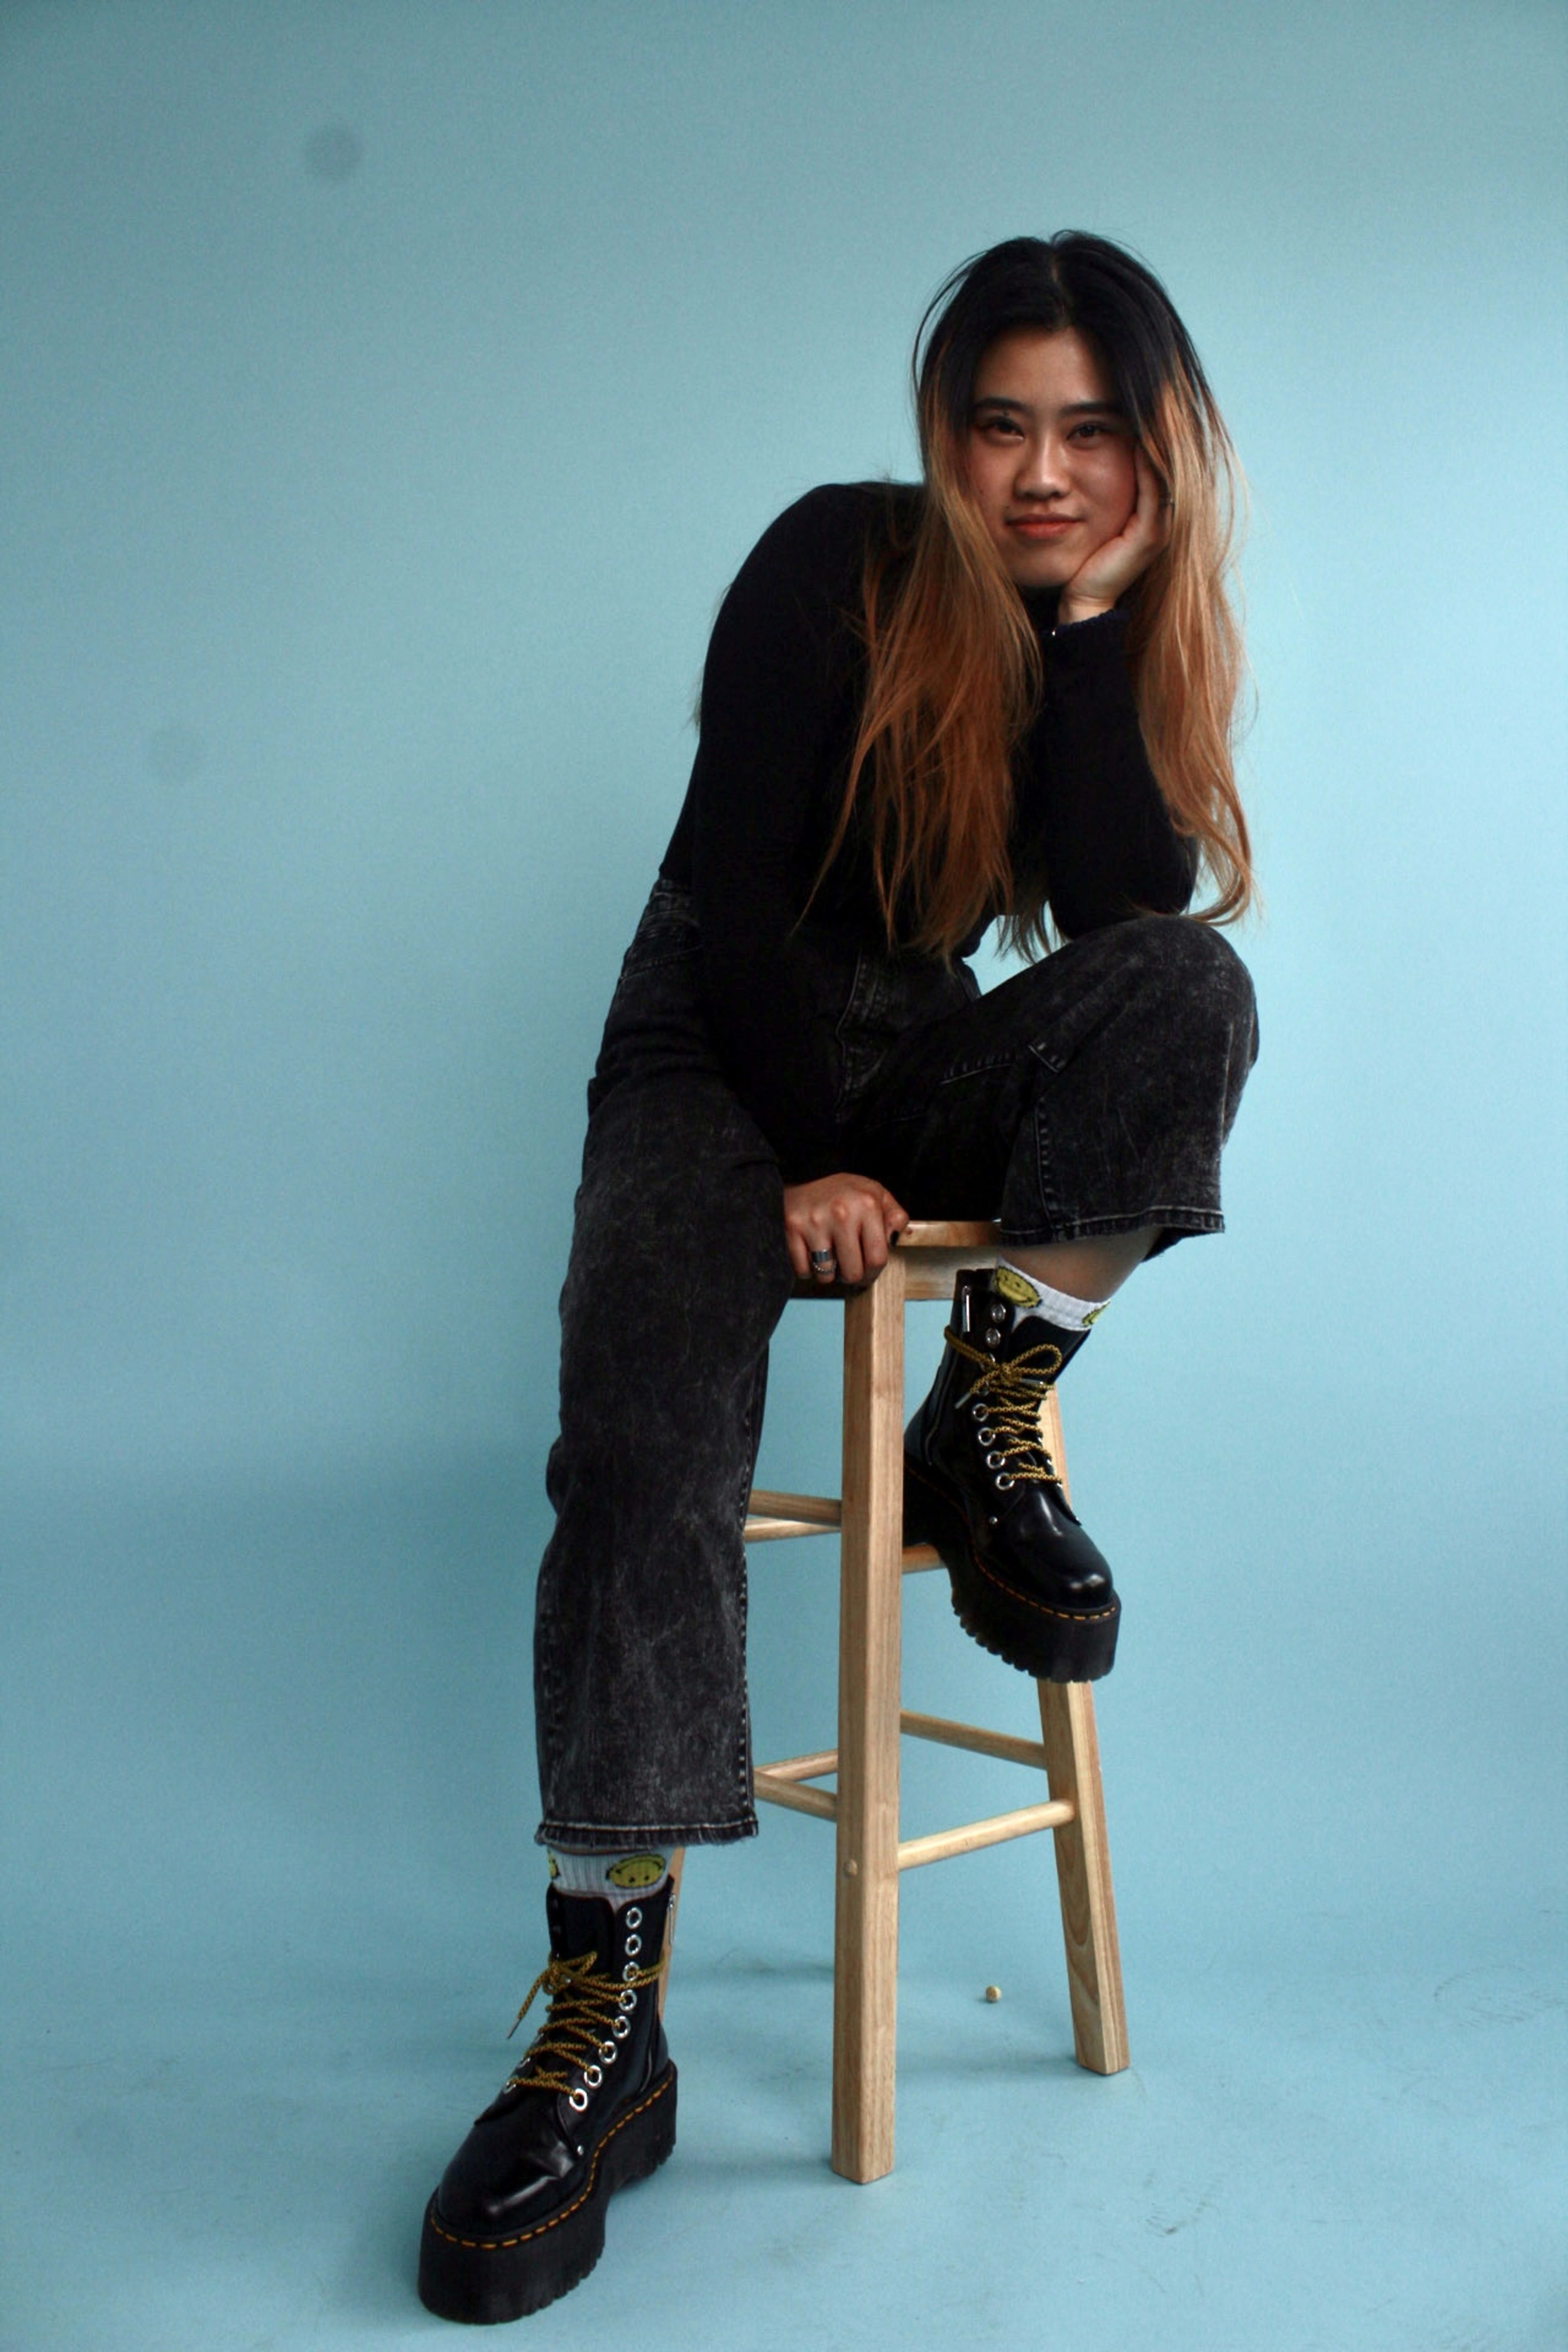 A woman sitting on a wooden stool for a photo shoot.